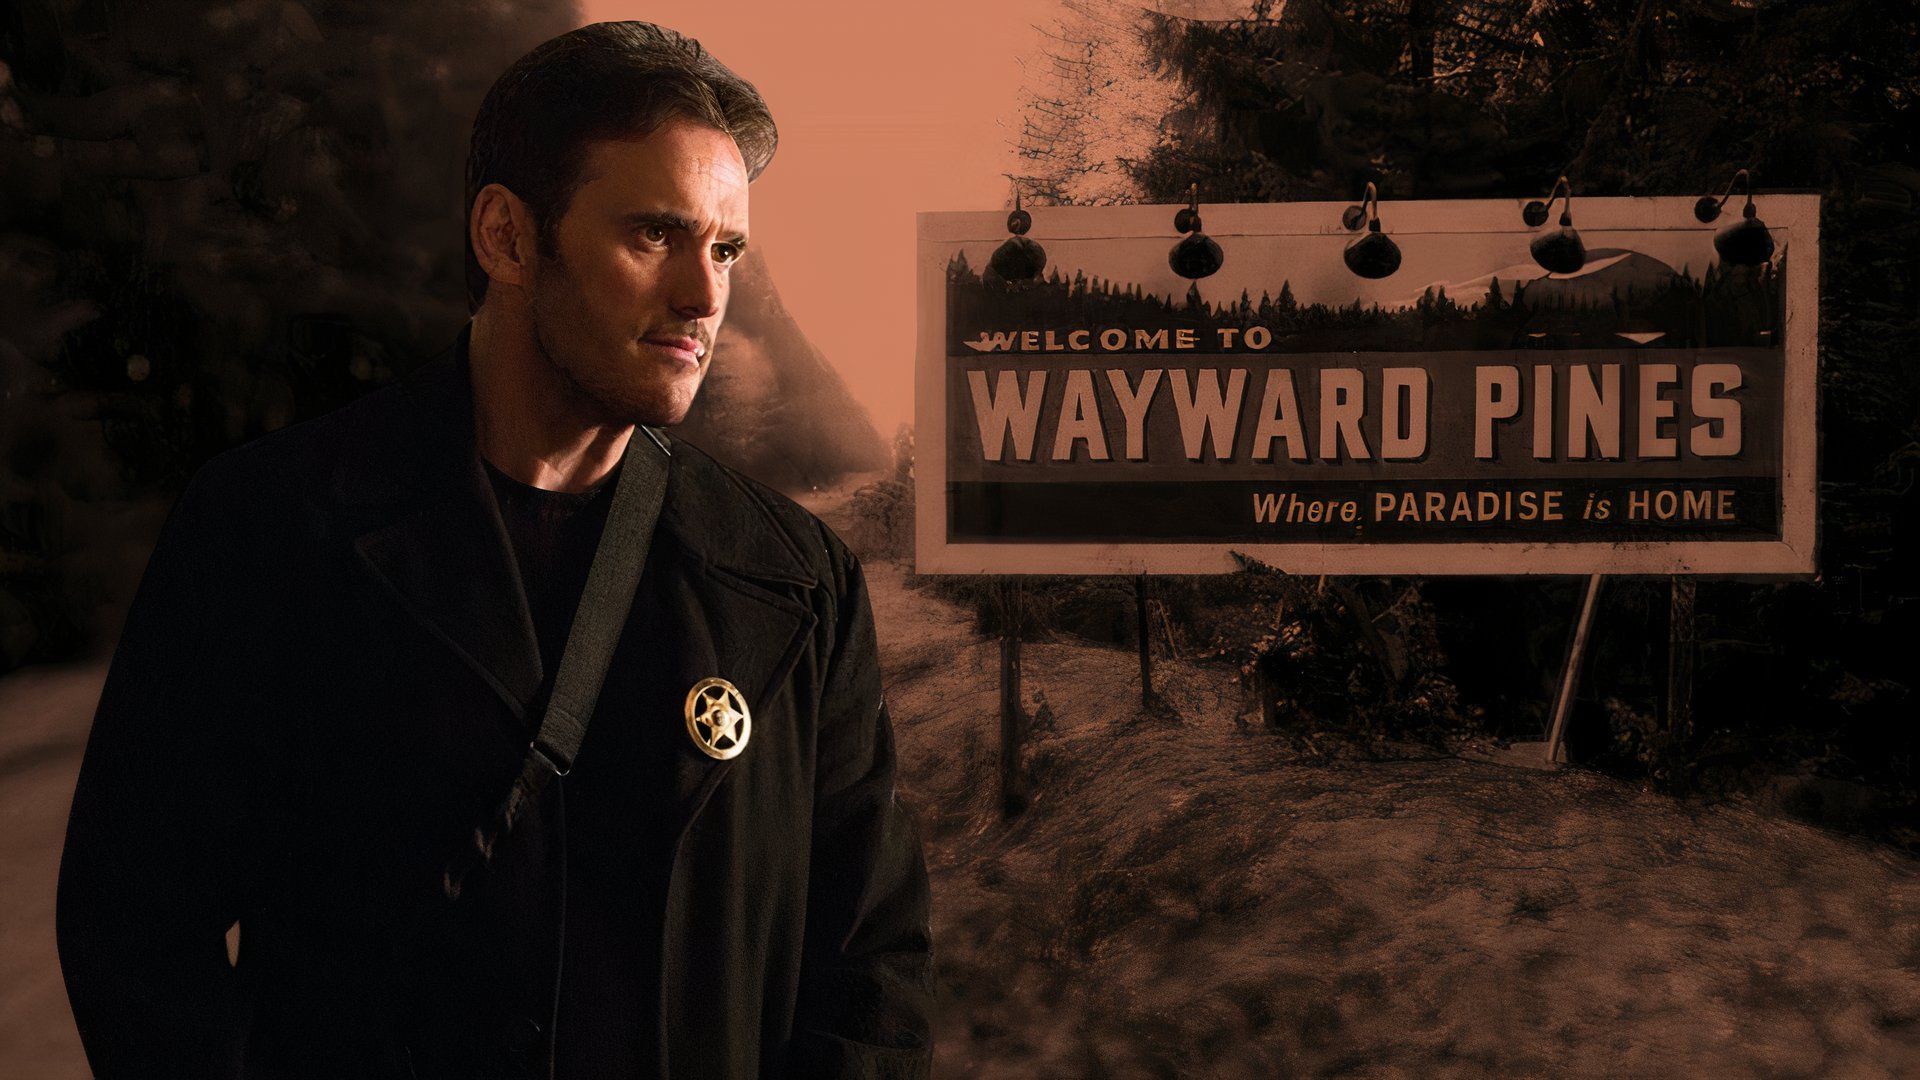 Matt Dillon as Ethan Burke wearing a black coat and badge with a Welcome to Wayward Pines sign in the background